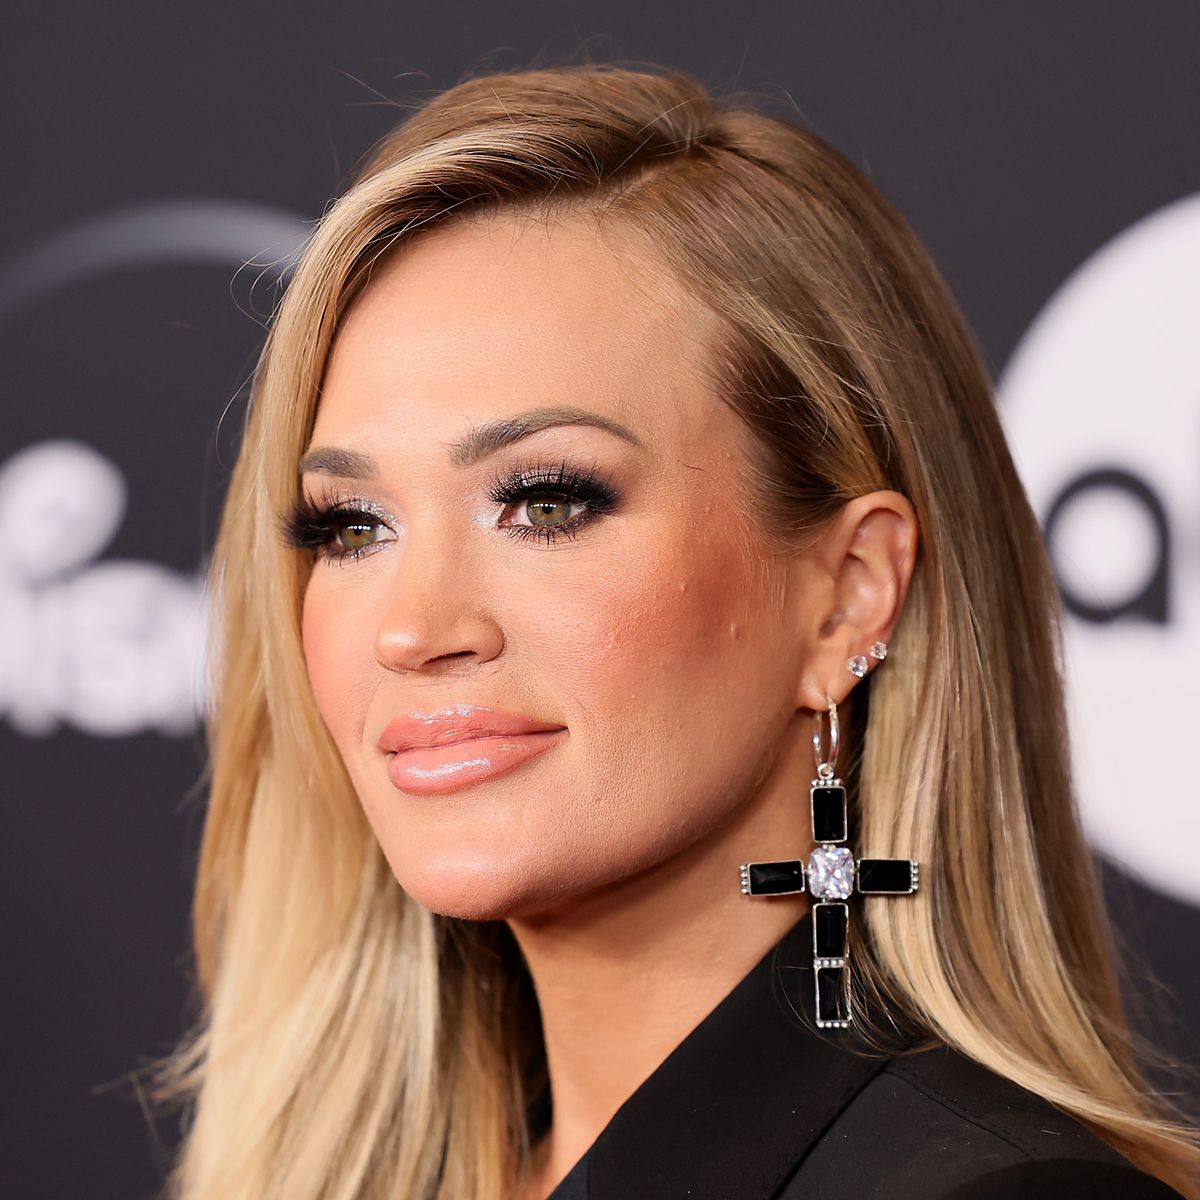 Fans Bombard Carrie Underwood's Instagram After CMA Awards Snub